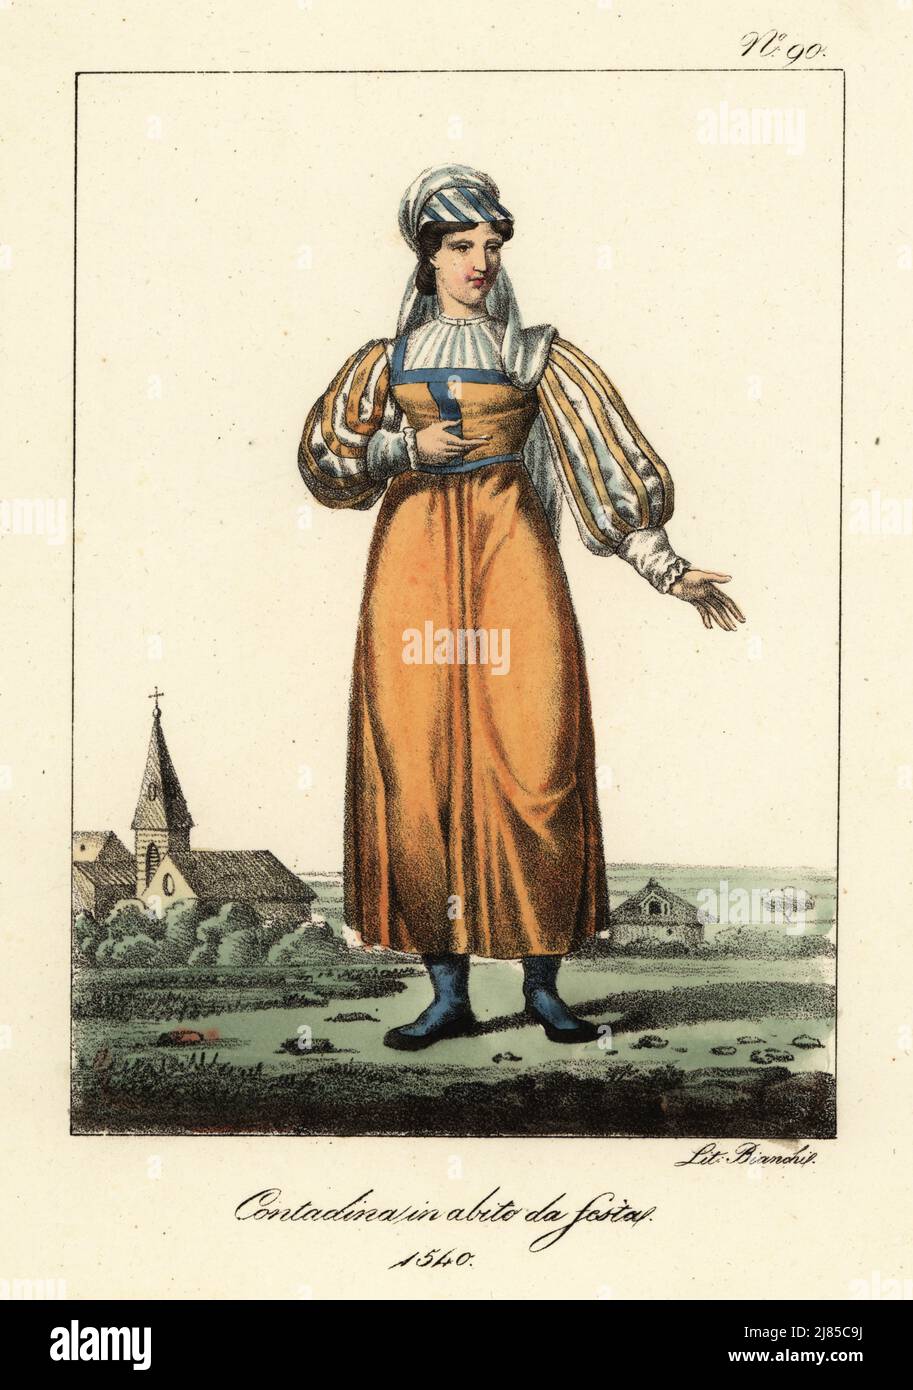 French peasant woman in festival costume, 1540. In bonnet, veil, gown with  bodice, slashed sleeves. Paysanne en habit de fete. Handcoloured lithograph  by Lorenzo Bianchi after Hippolyte Lecomte from Costumi civili e